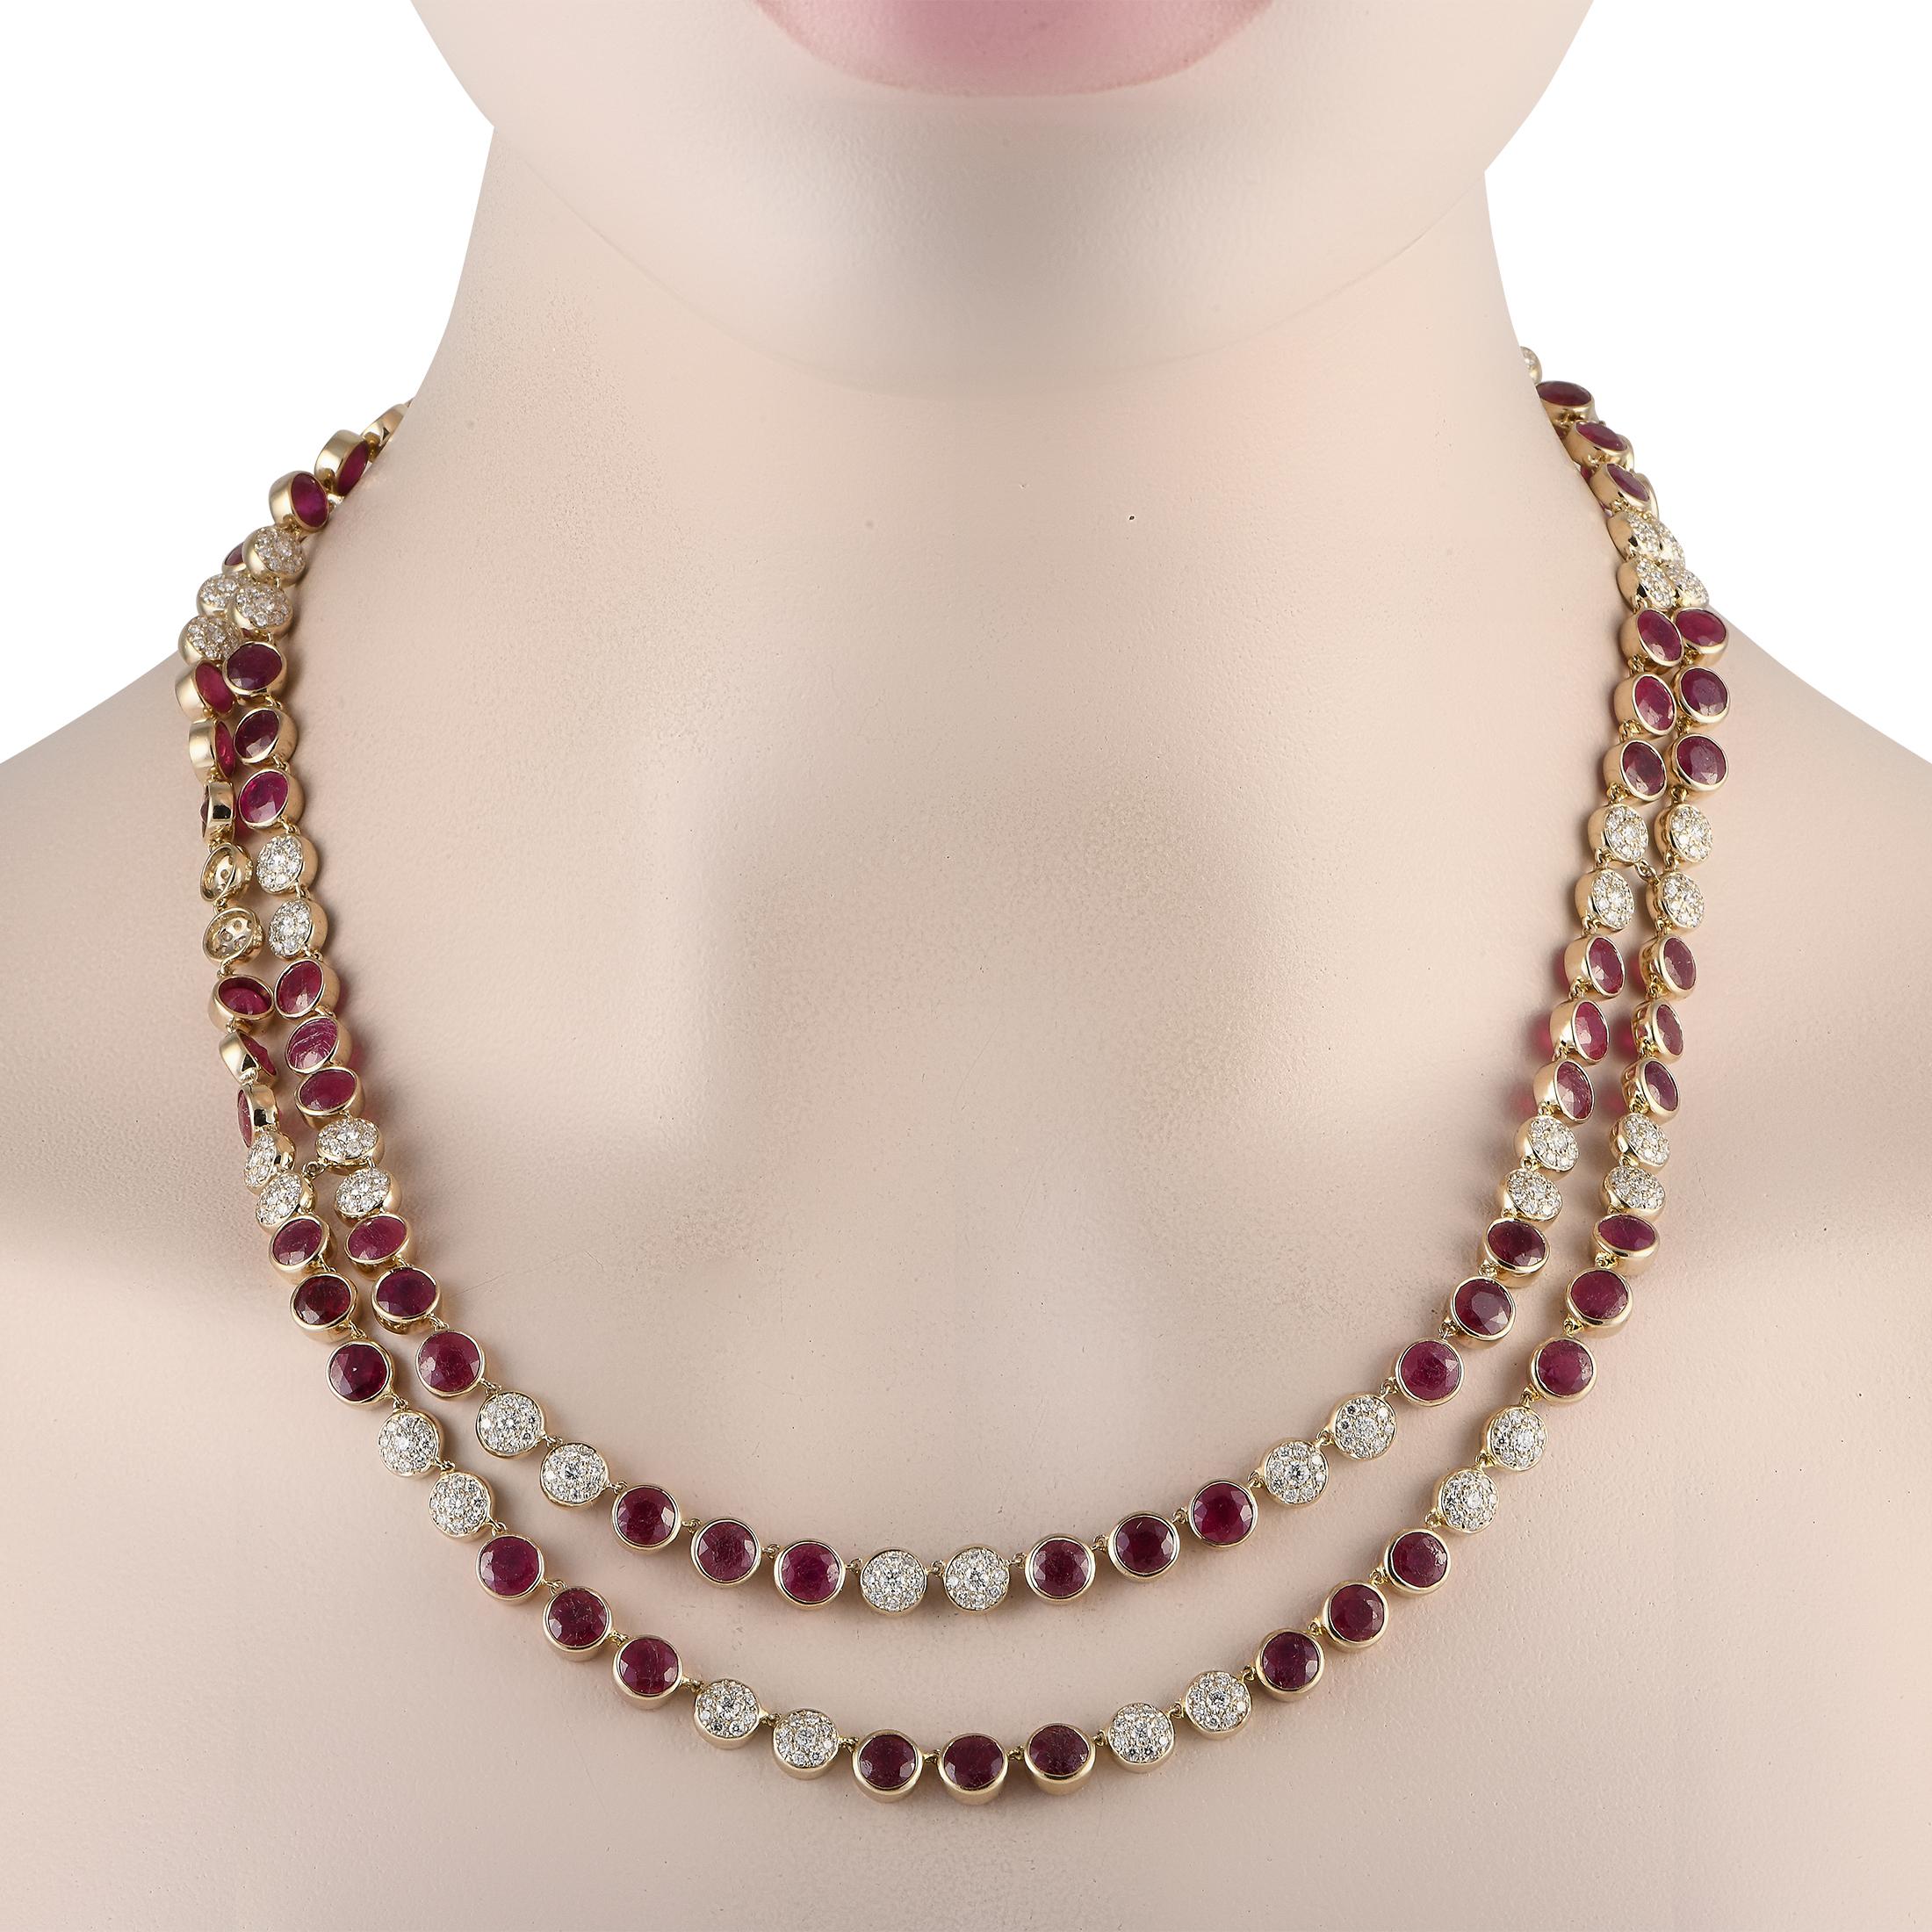 This dramatic dual-strand necklace is a luxurious showpiece that will continually impress. Ruby gemstones totaling 40.0 carats alternate with 6.50 carats of sparkling Diamond accents. Crafted from 18K Yellow Gold, this eye-catching accessory